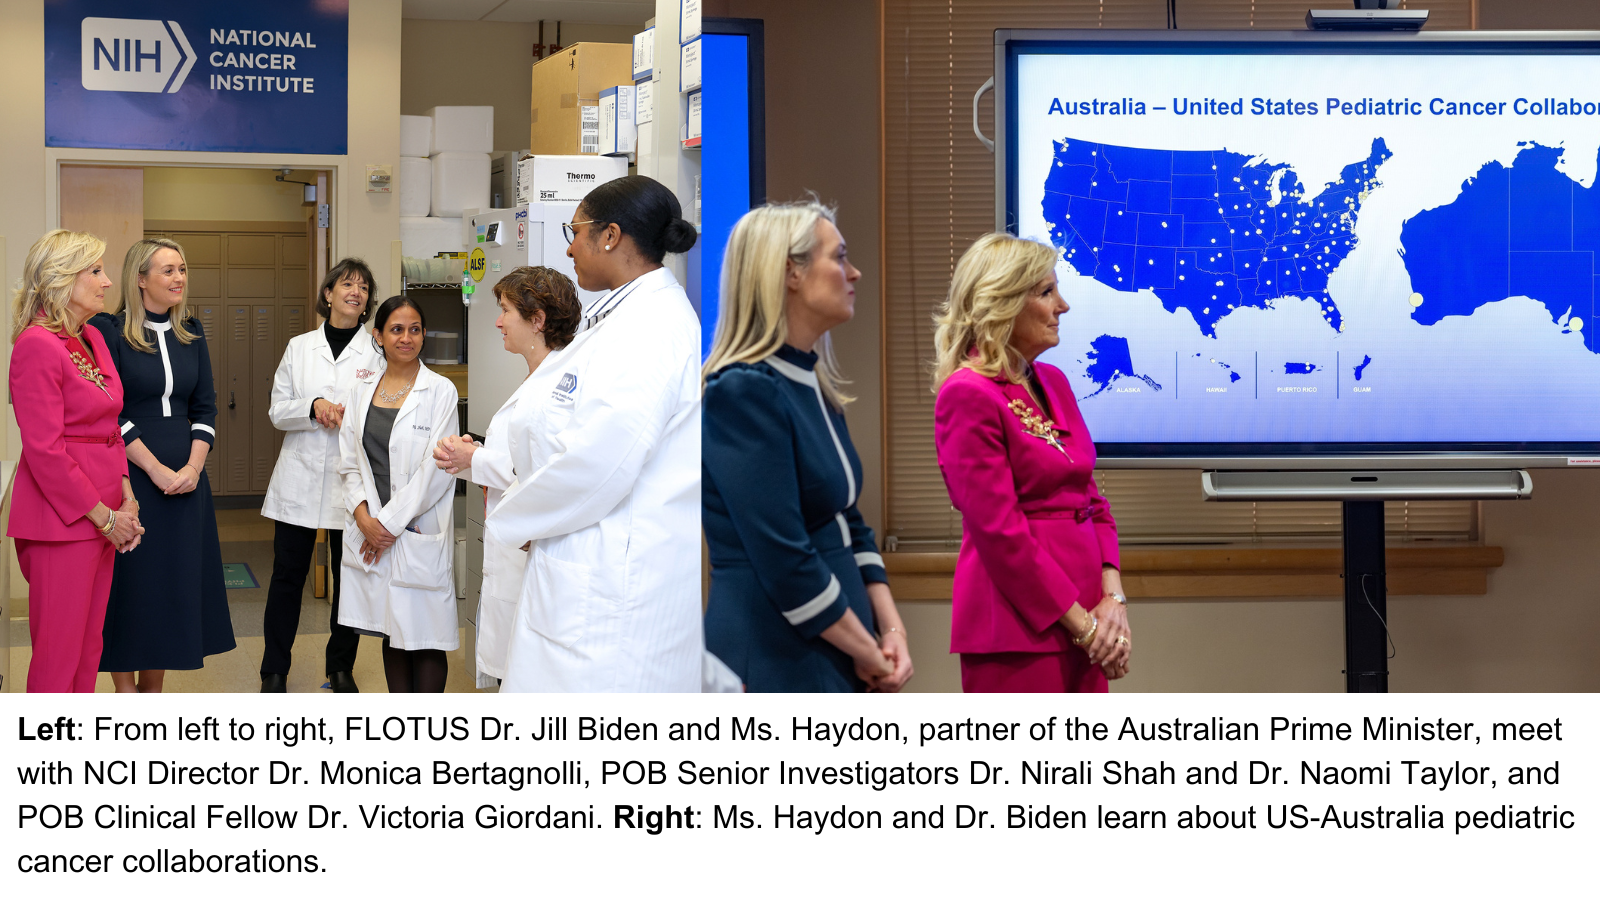 Dr. Jill Biden (right) and Ms. Haydon (left) visit the NIH Clinical Center.